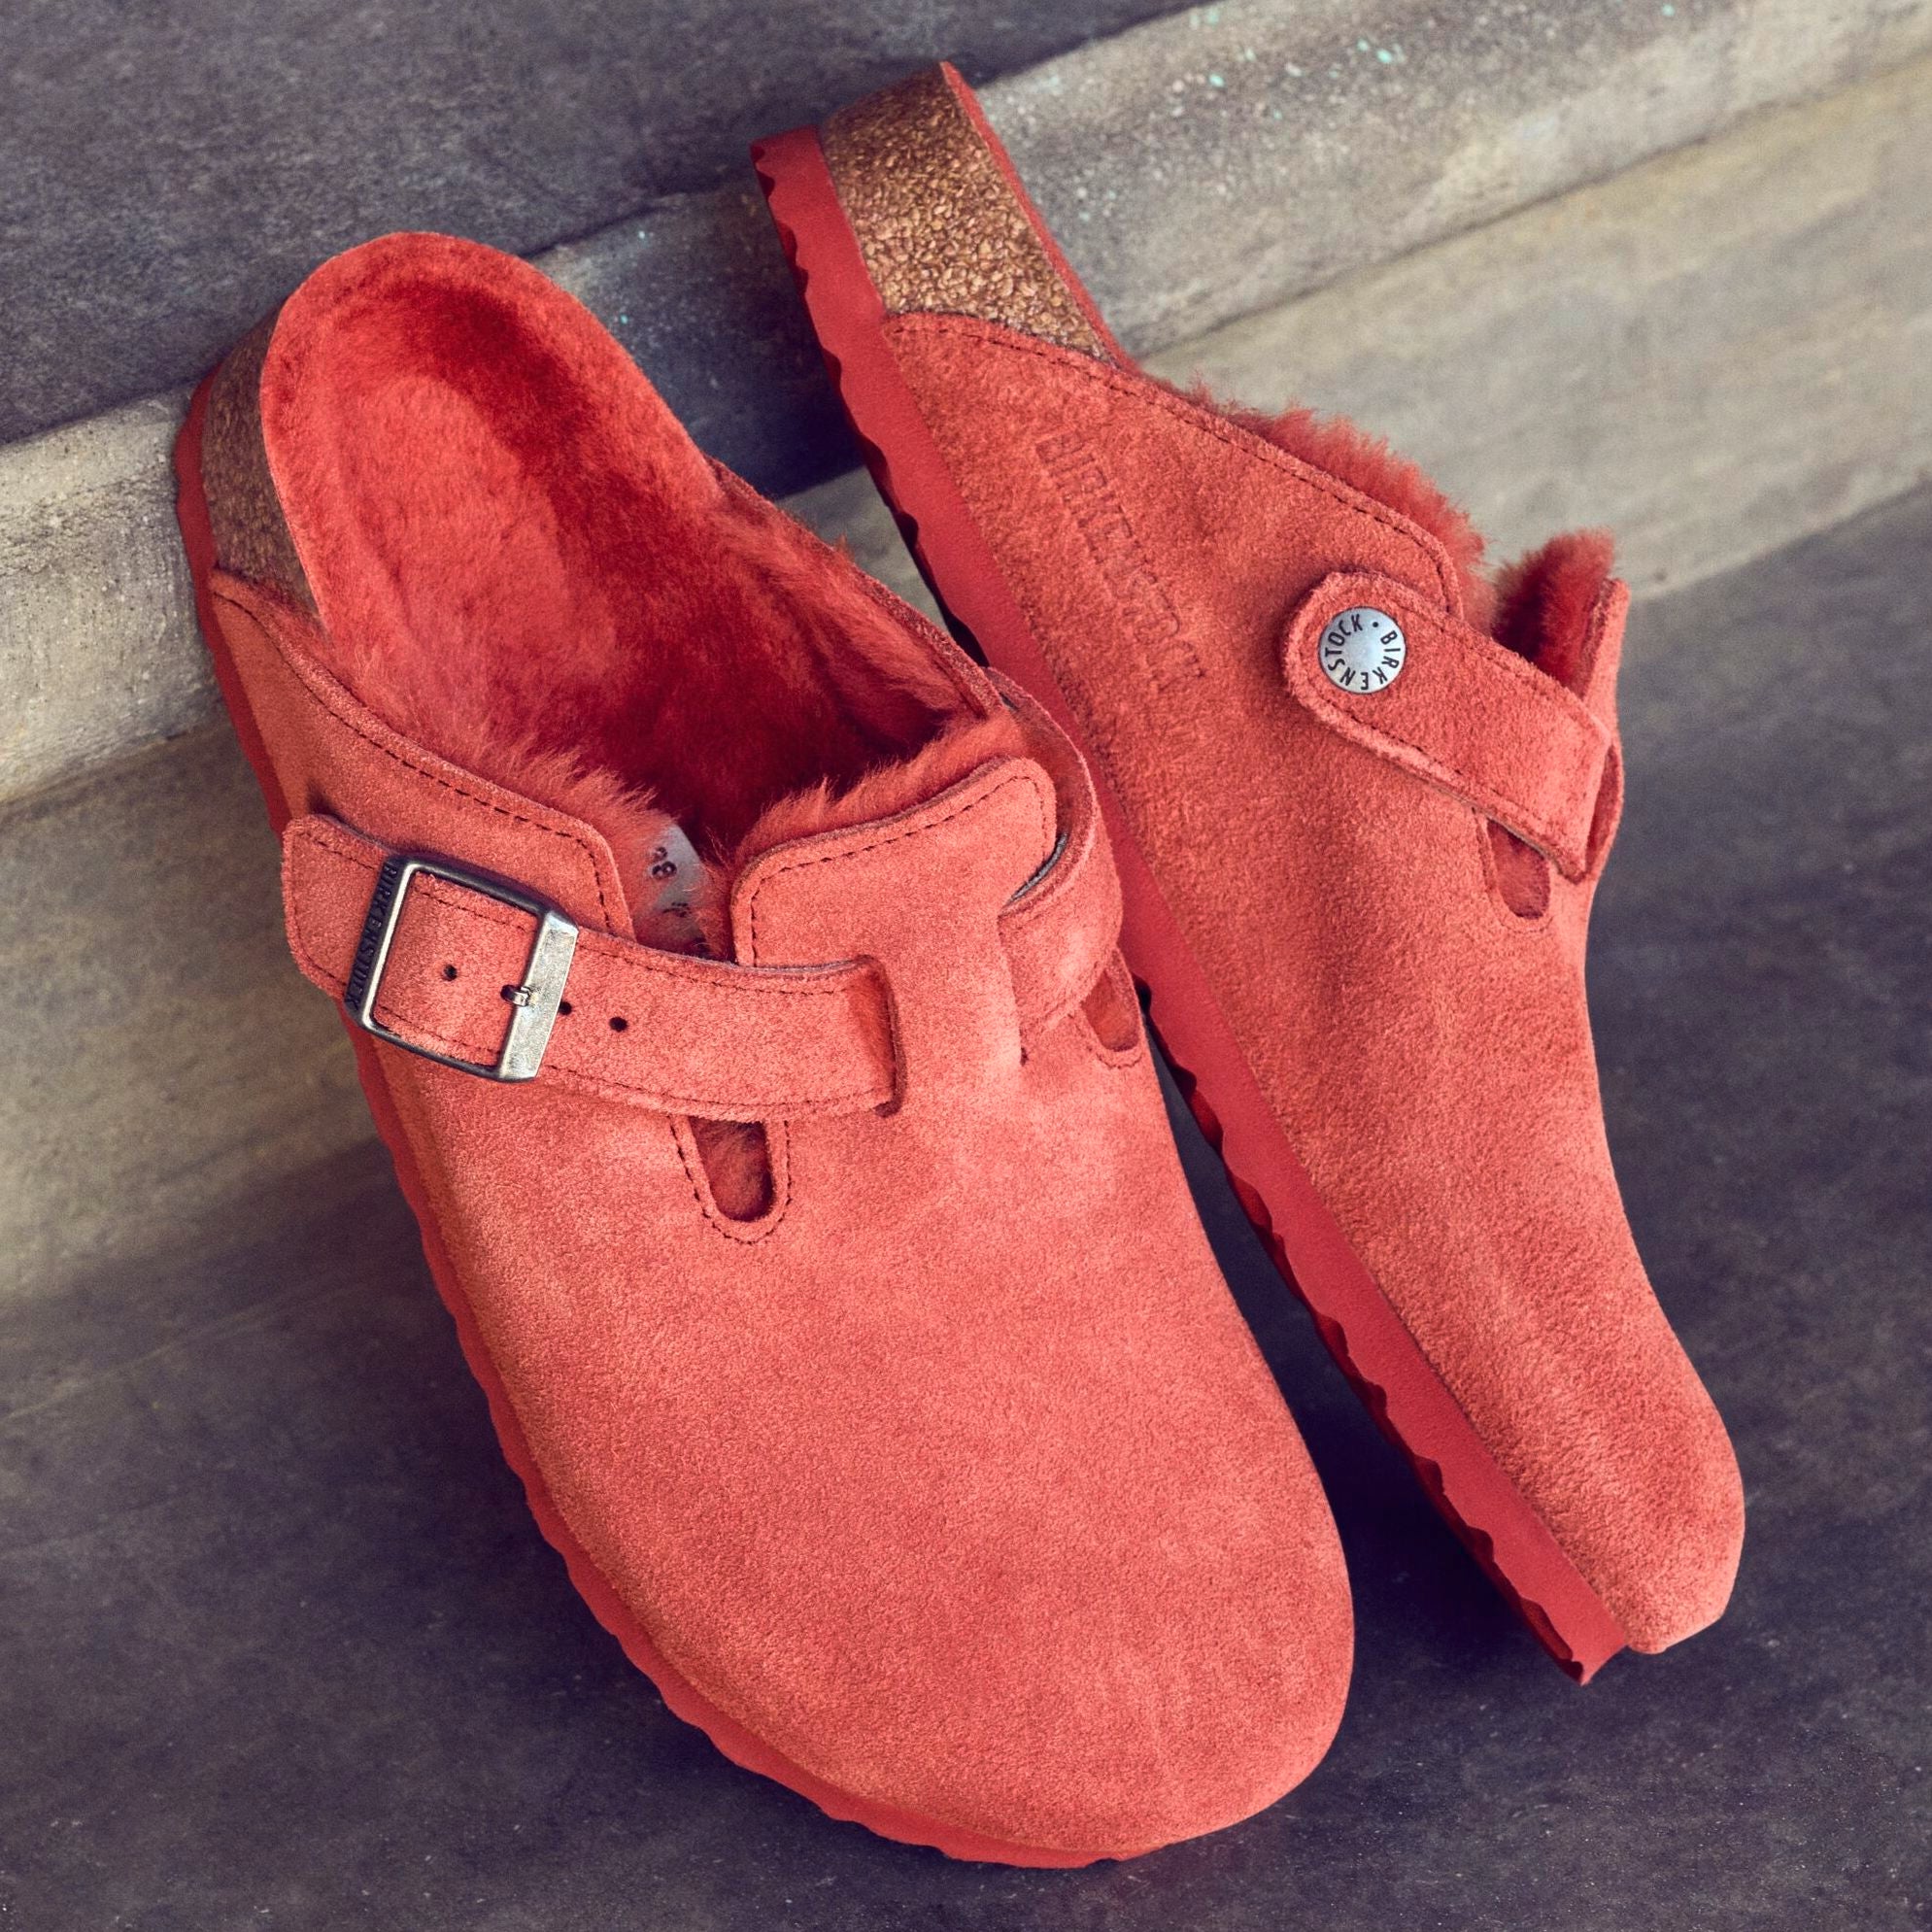 Birkenstock Limited Edition Boston sienna red suede/sienna red shearling